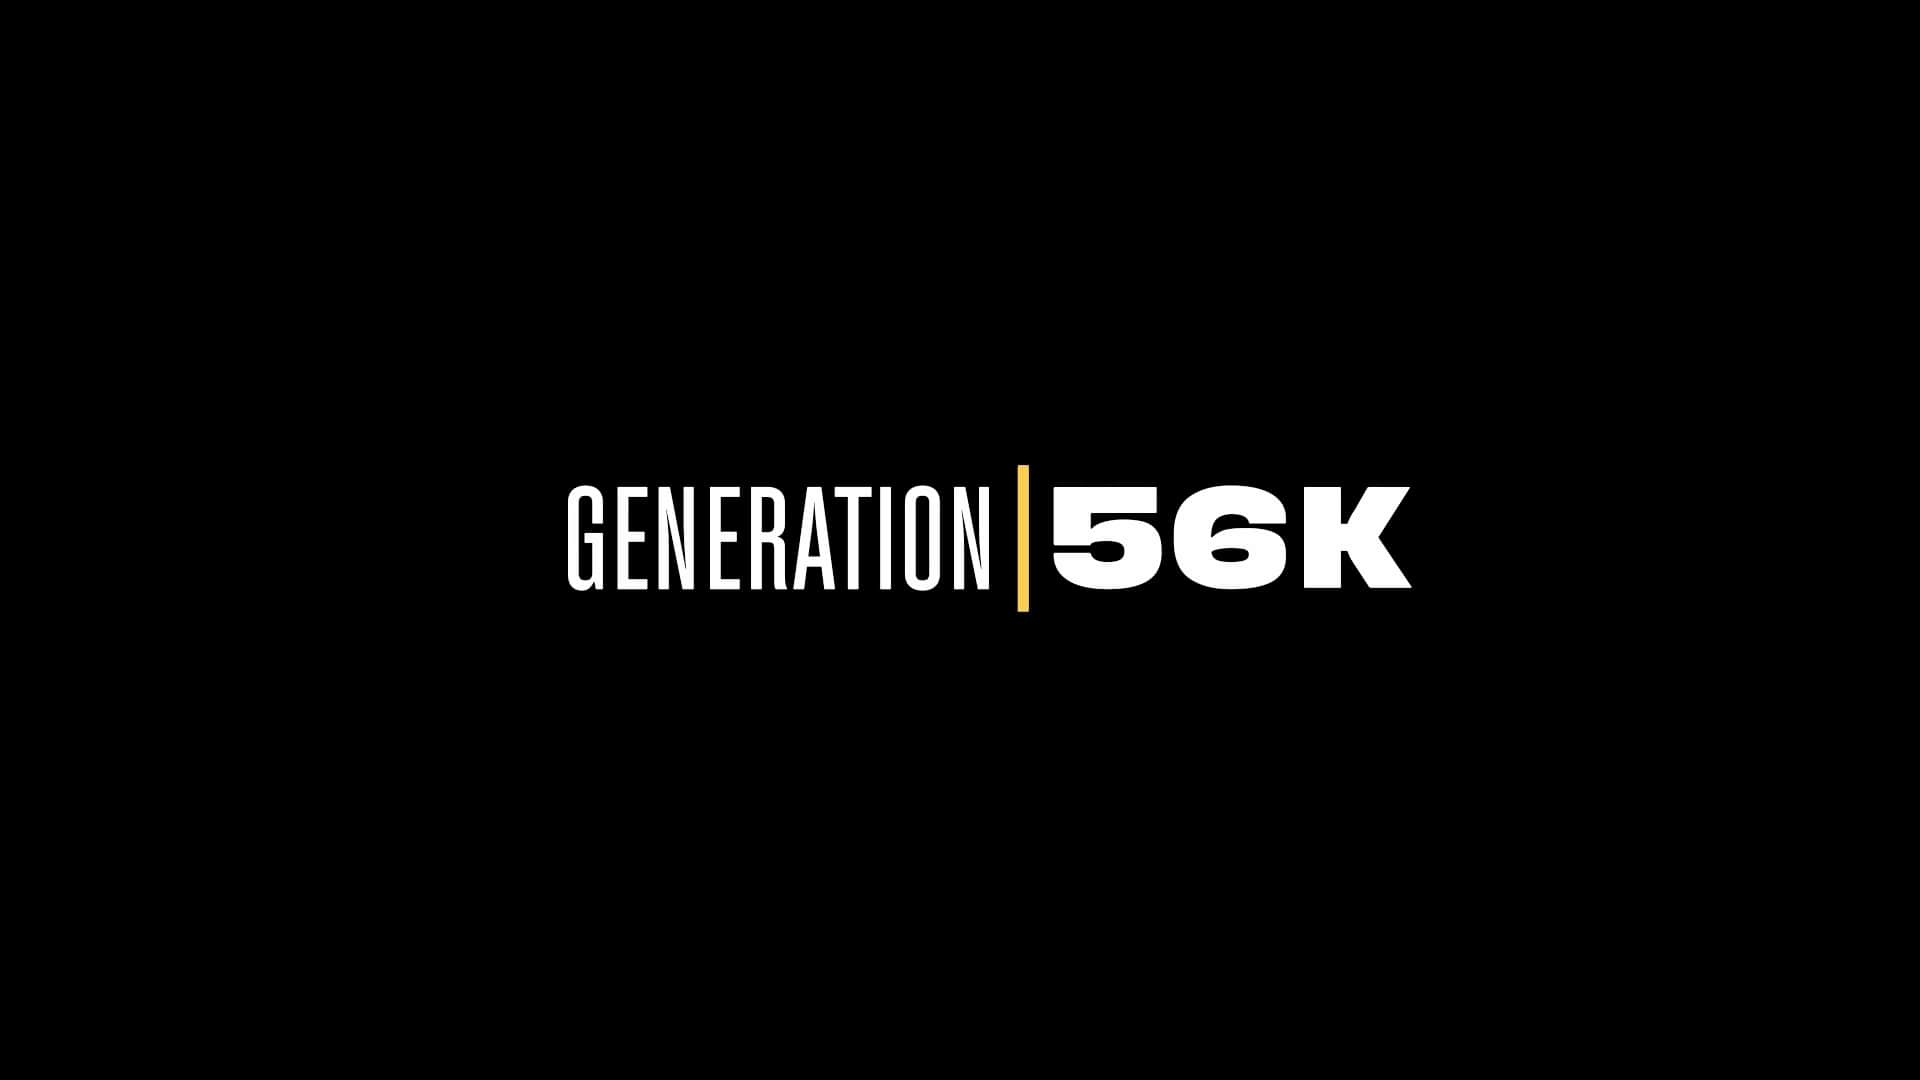 Netflix Generation 56k Official Trailer, Coming to Netflix in July 2021